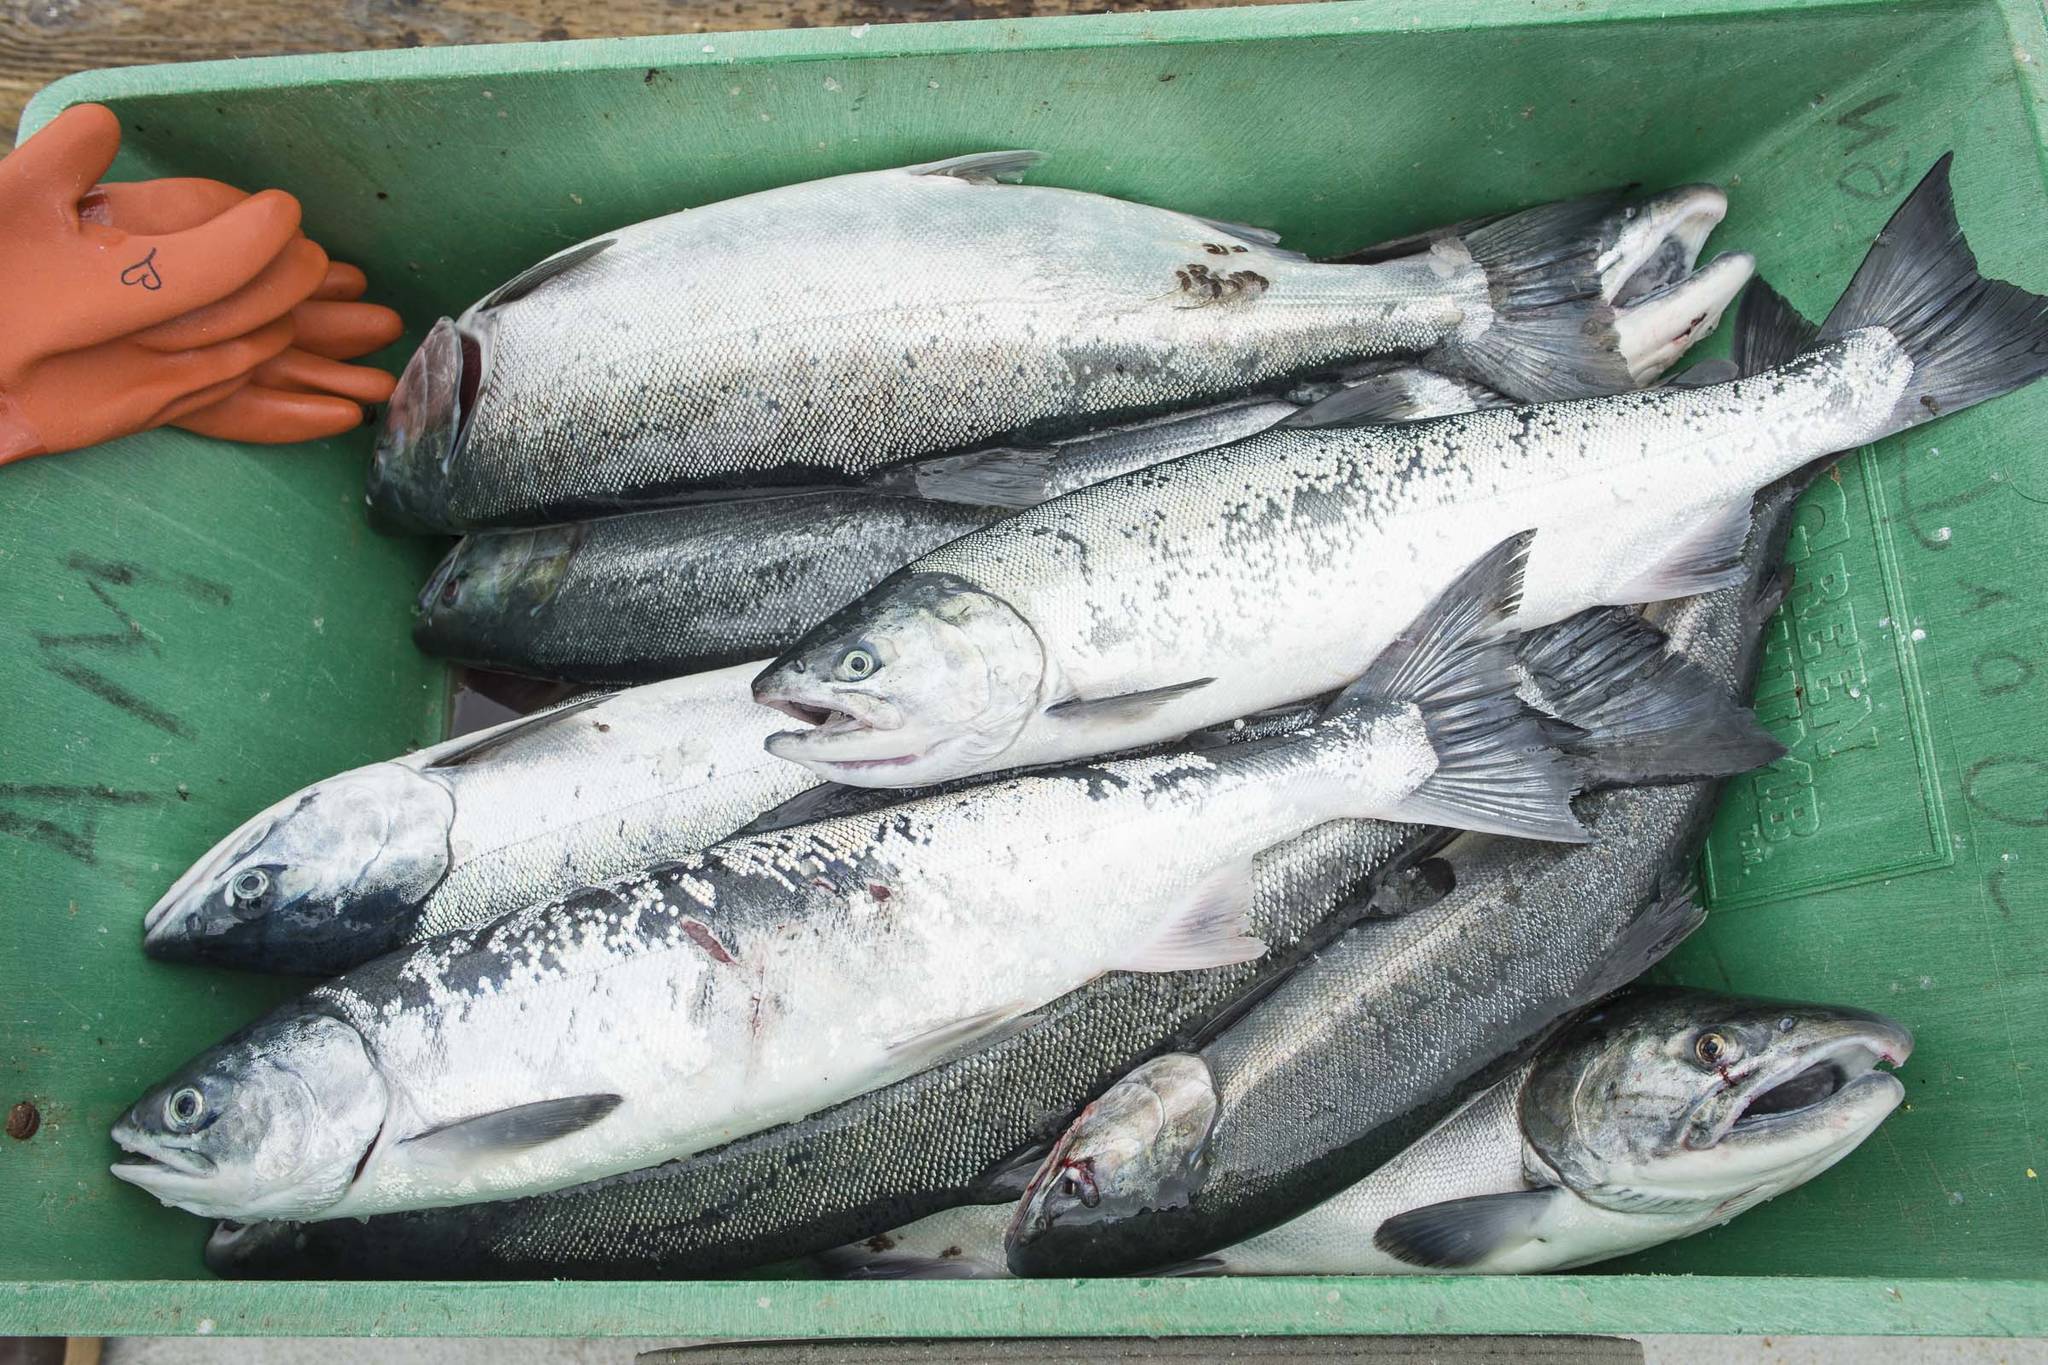 A dozen coho turned in at the Golden North Salmon Derby’s station at Amalga Harbor on Saturday, Aug. 24, 2019. (Michael Penn | Juneau Empire)